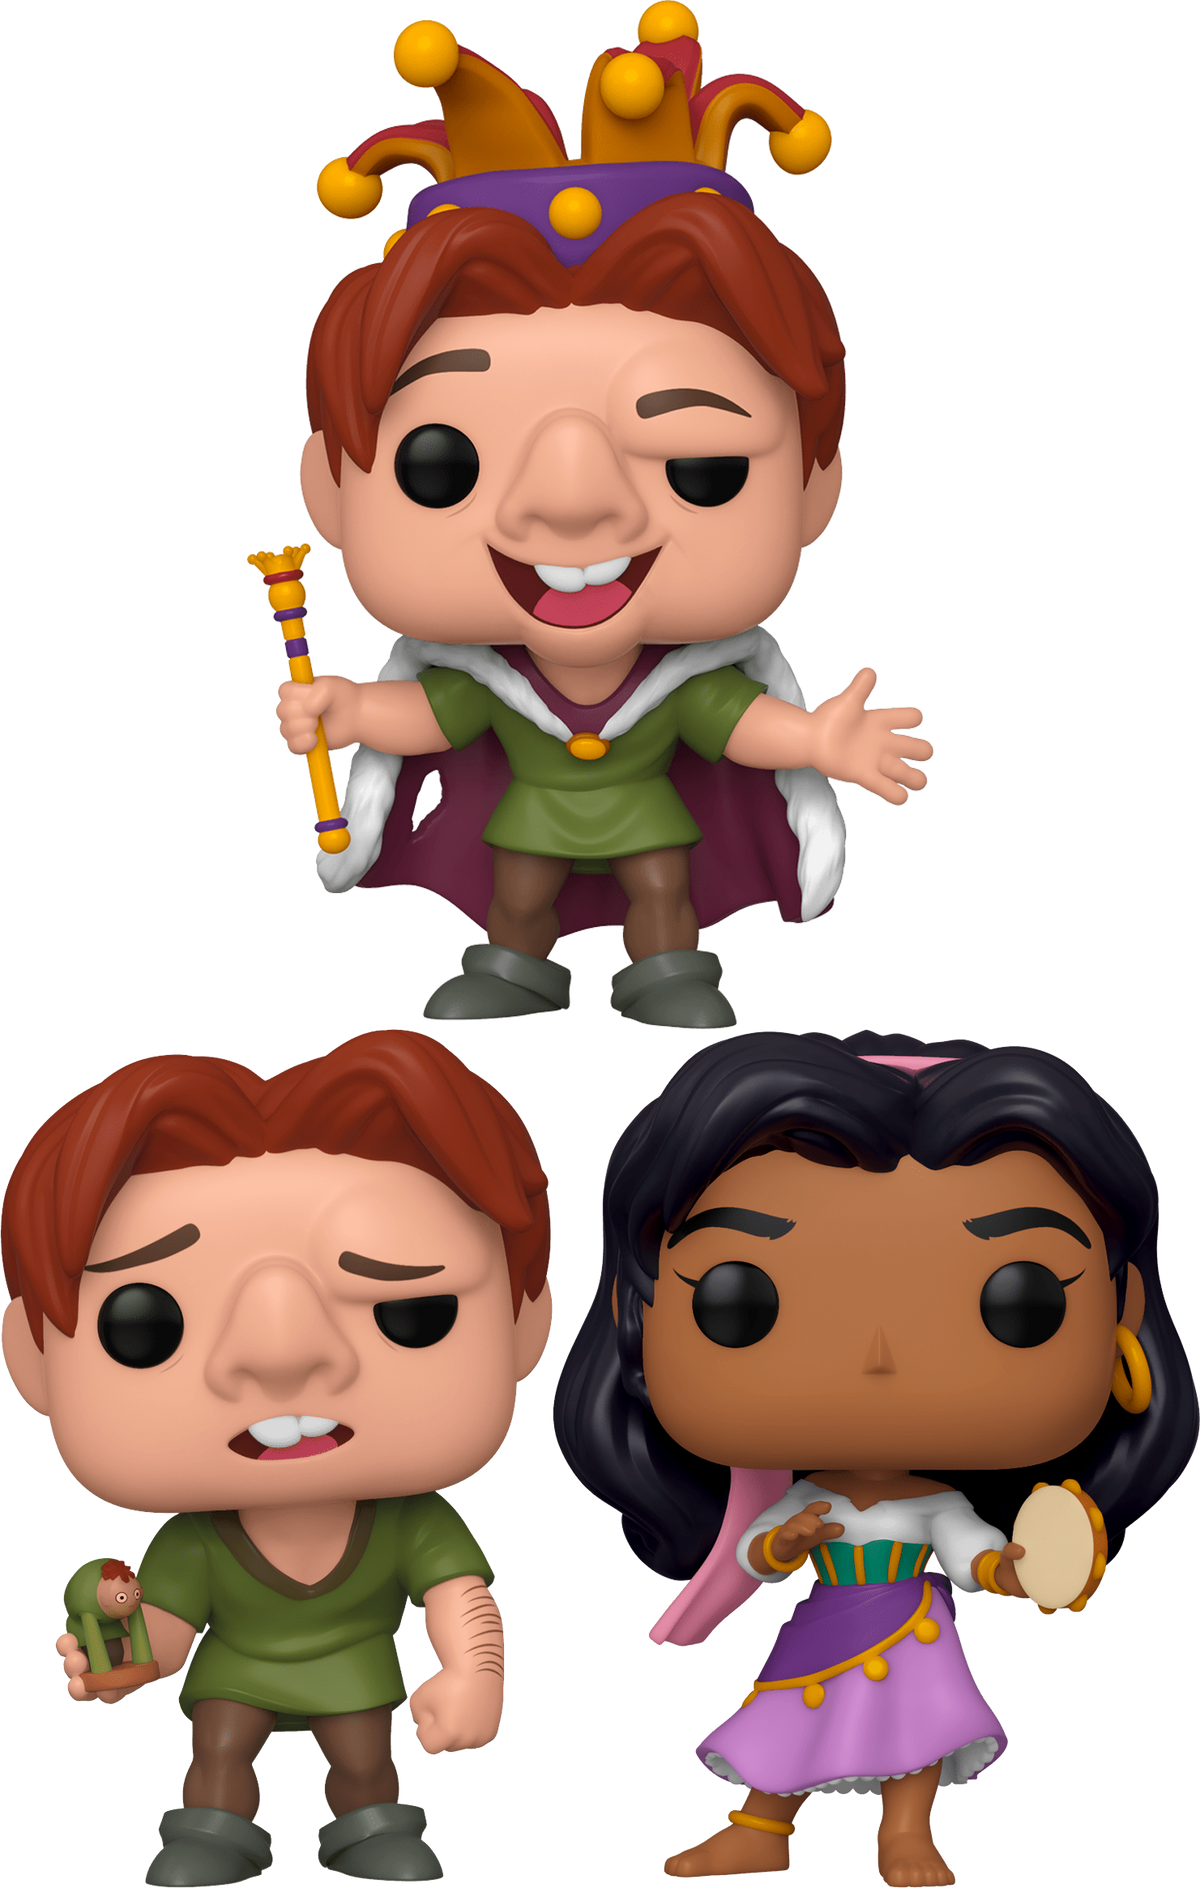 Funko Pop!  The Hunchback of Notre Dame (1996) - Quasimodo #633 - The Amazing Collectables